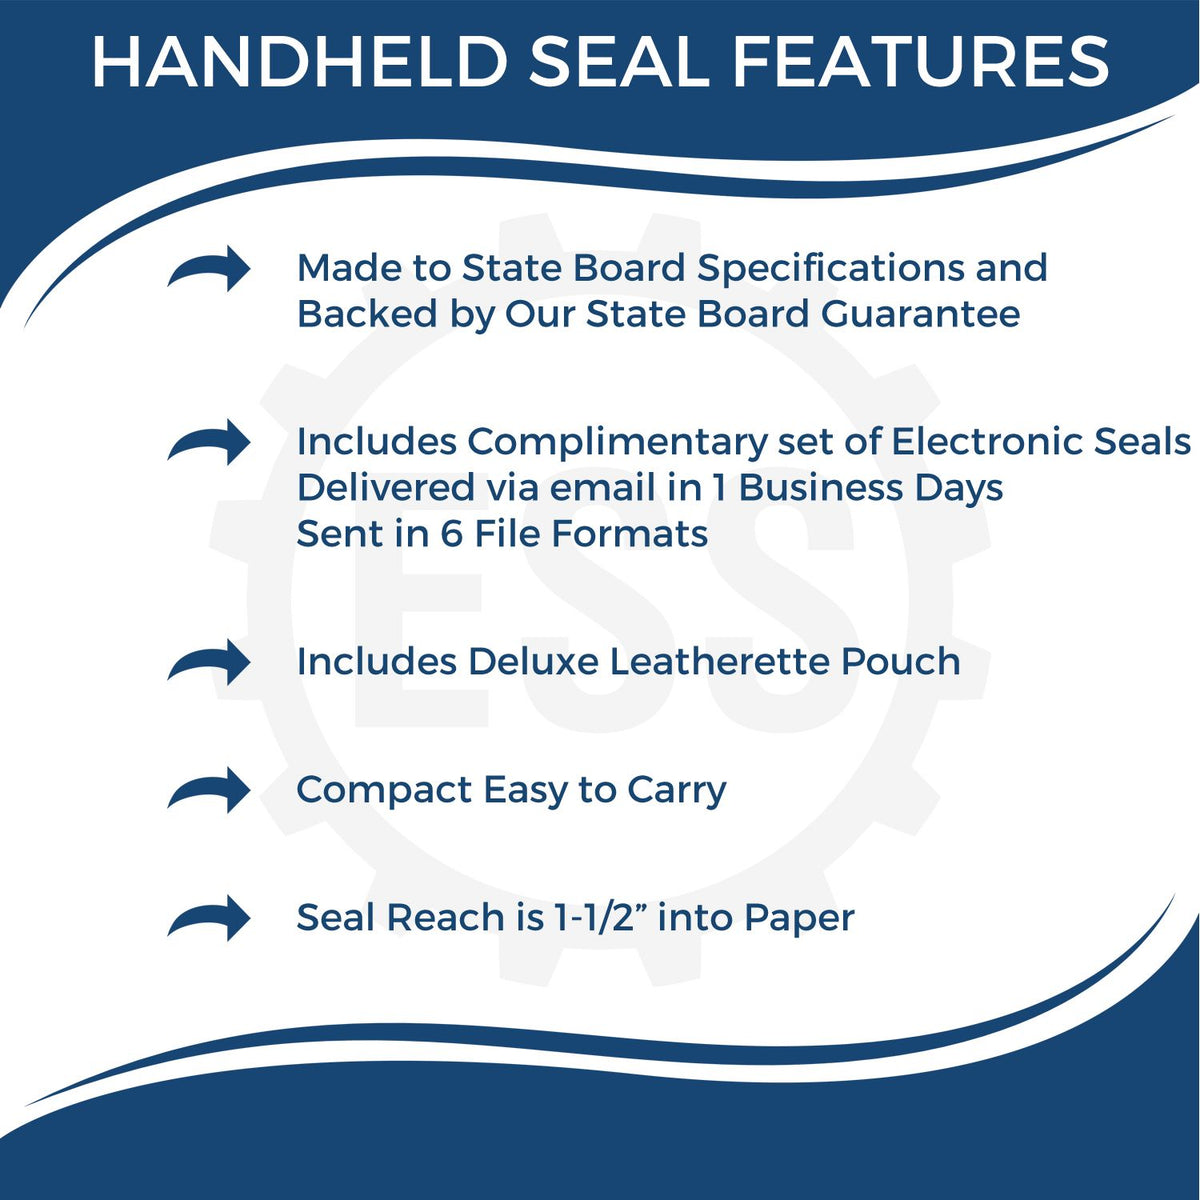 A picture of an infographic highlighting the selling points for the Handheld Indiana Land Surveyor Seal